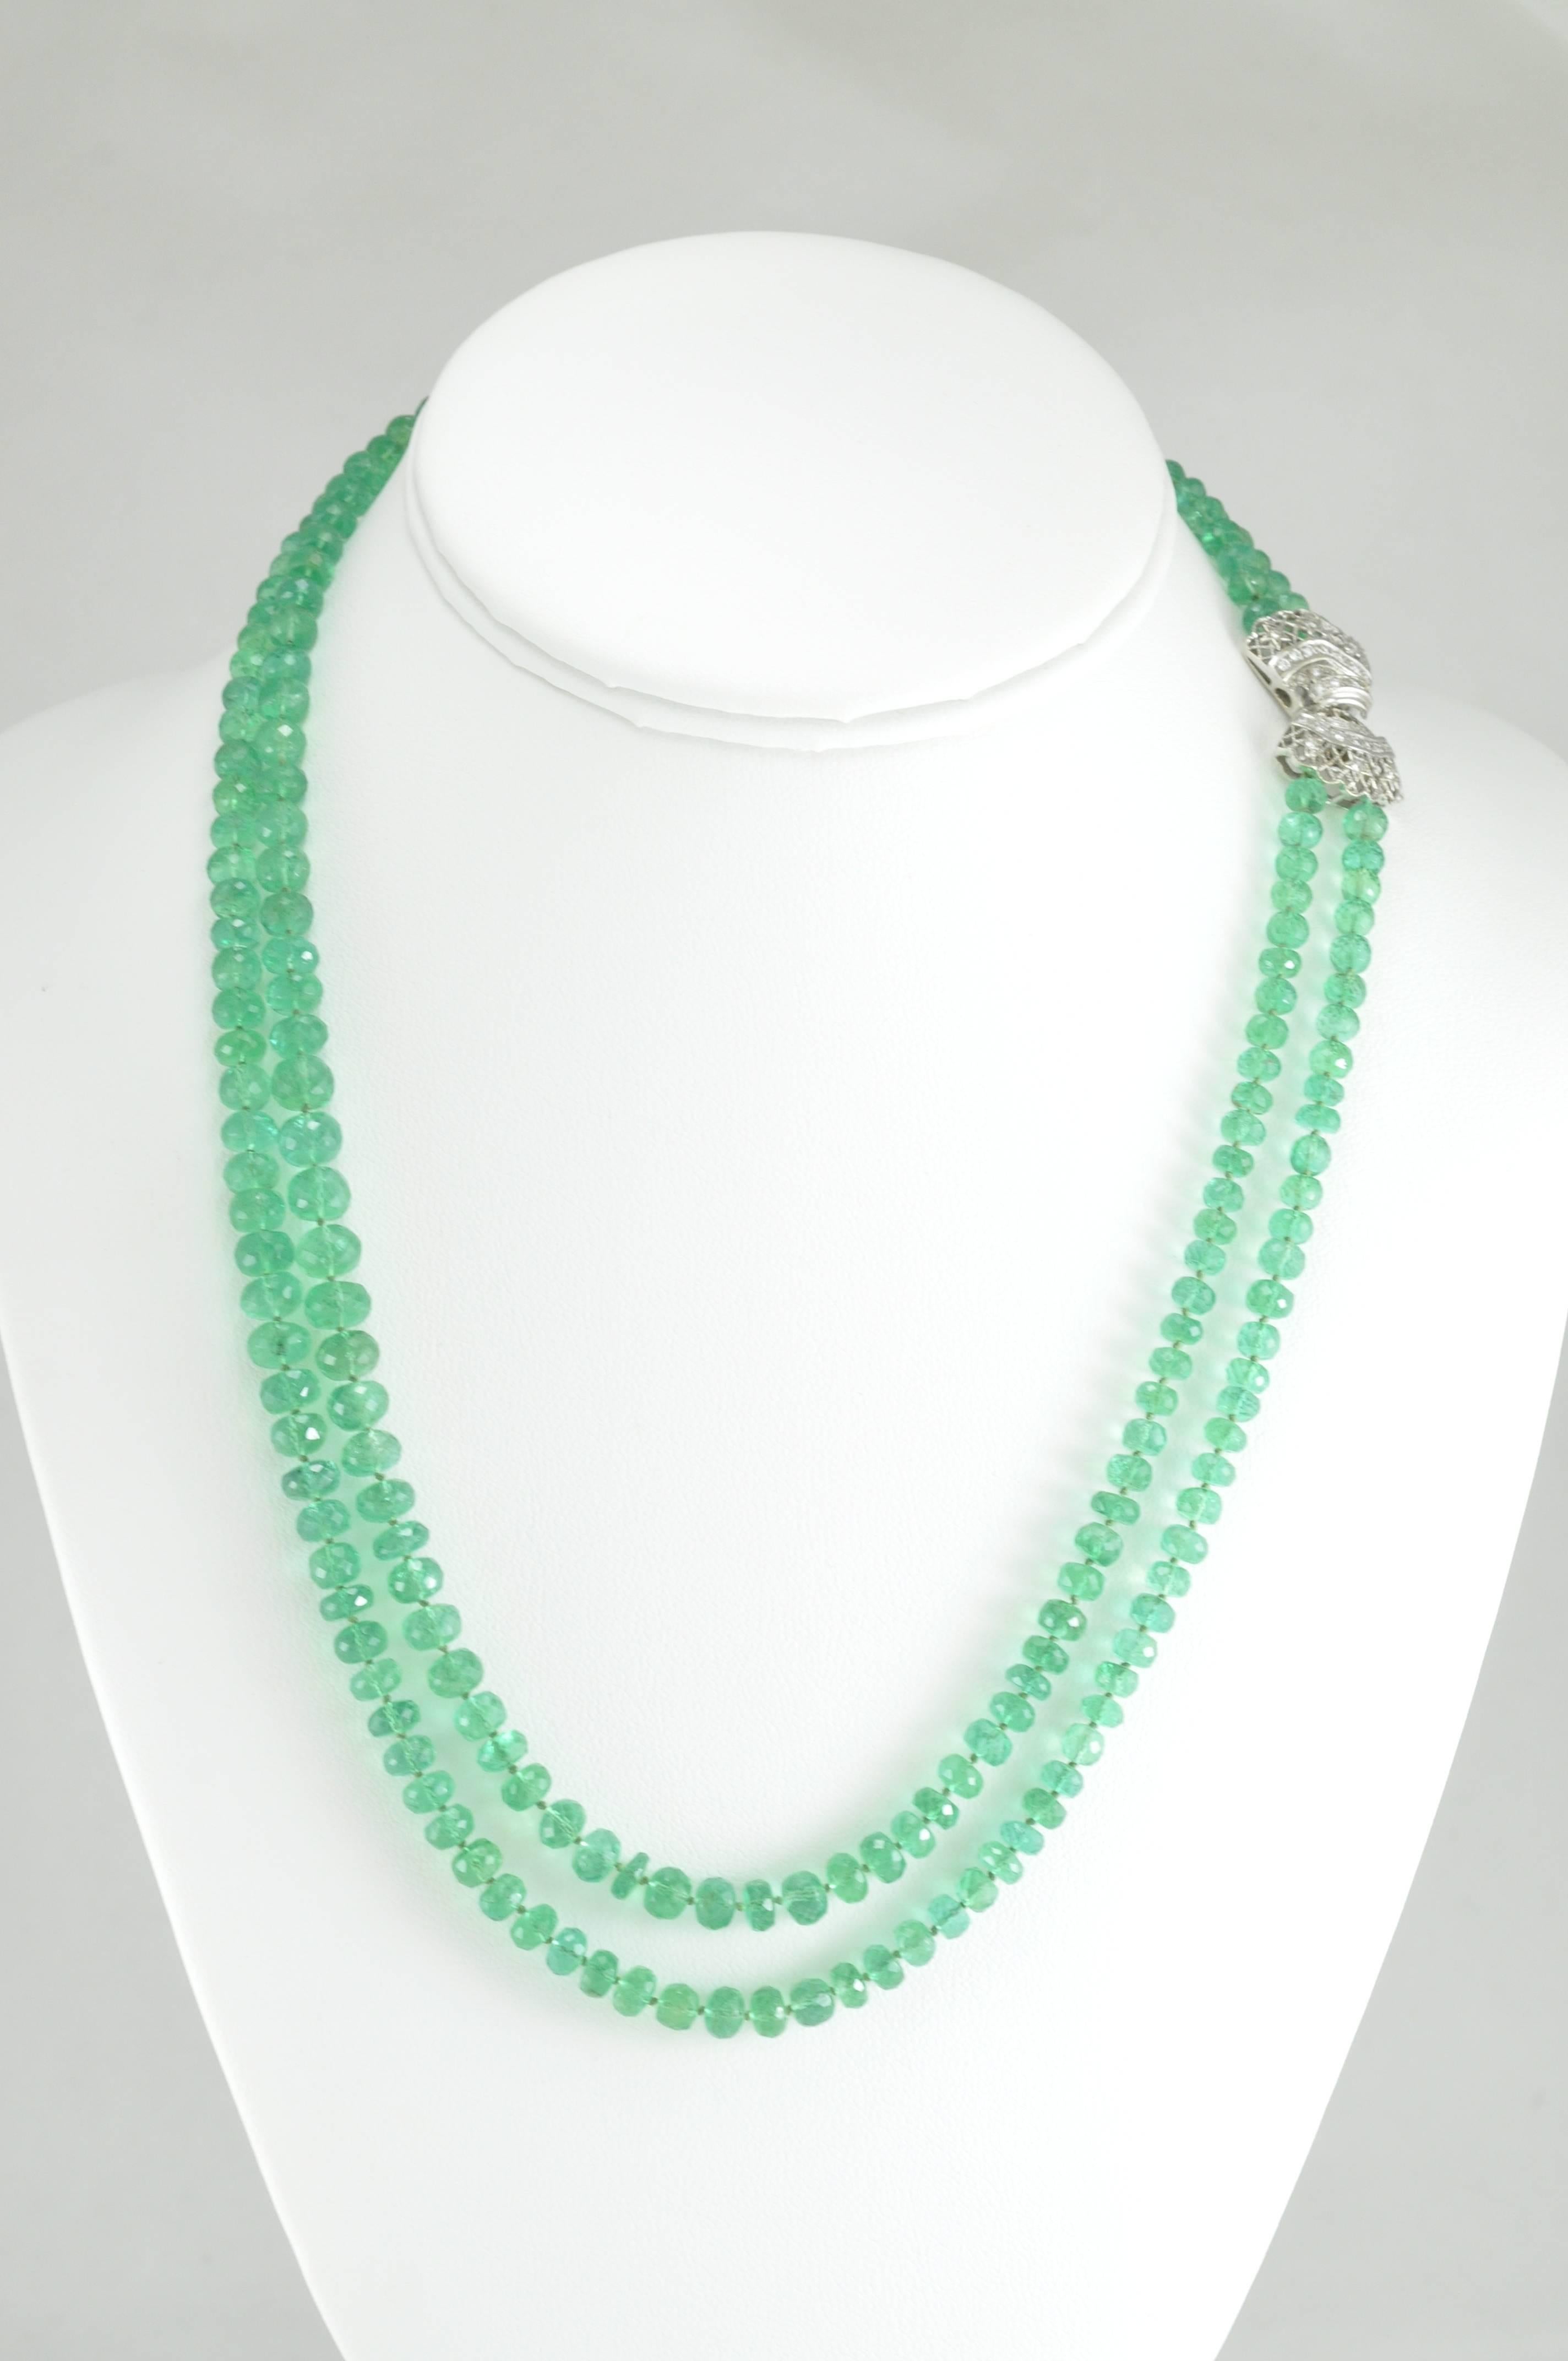 192ctw Double Strand Emerald Bead Necklace with 18kw Bowtie Clasp with .34ct Diamonds.
This necklace exudes elegance, sophistication while epitomizing style and grace. These beautiful gently graduated stones, have a truly remarkable color saturation